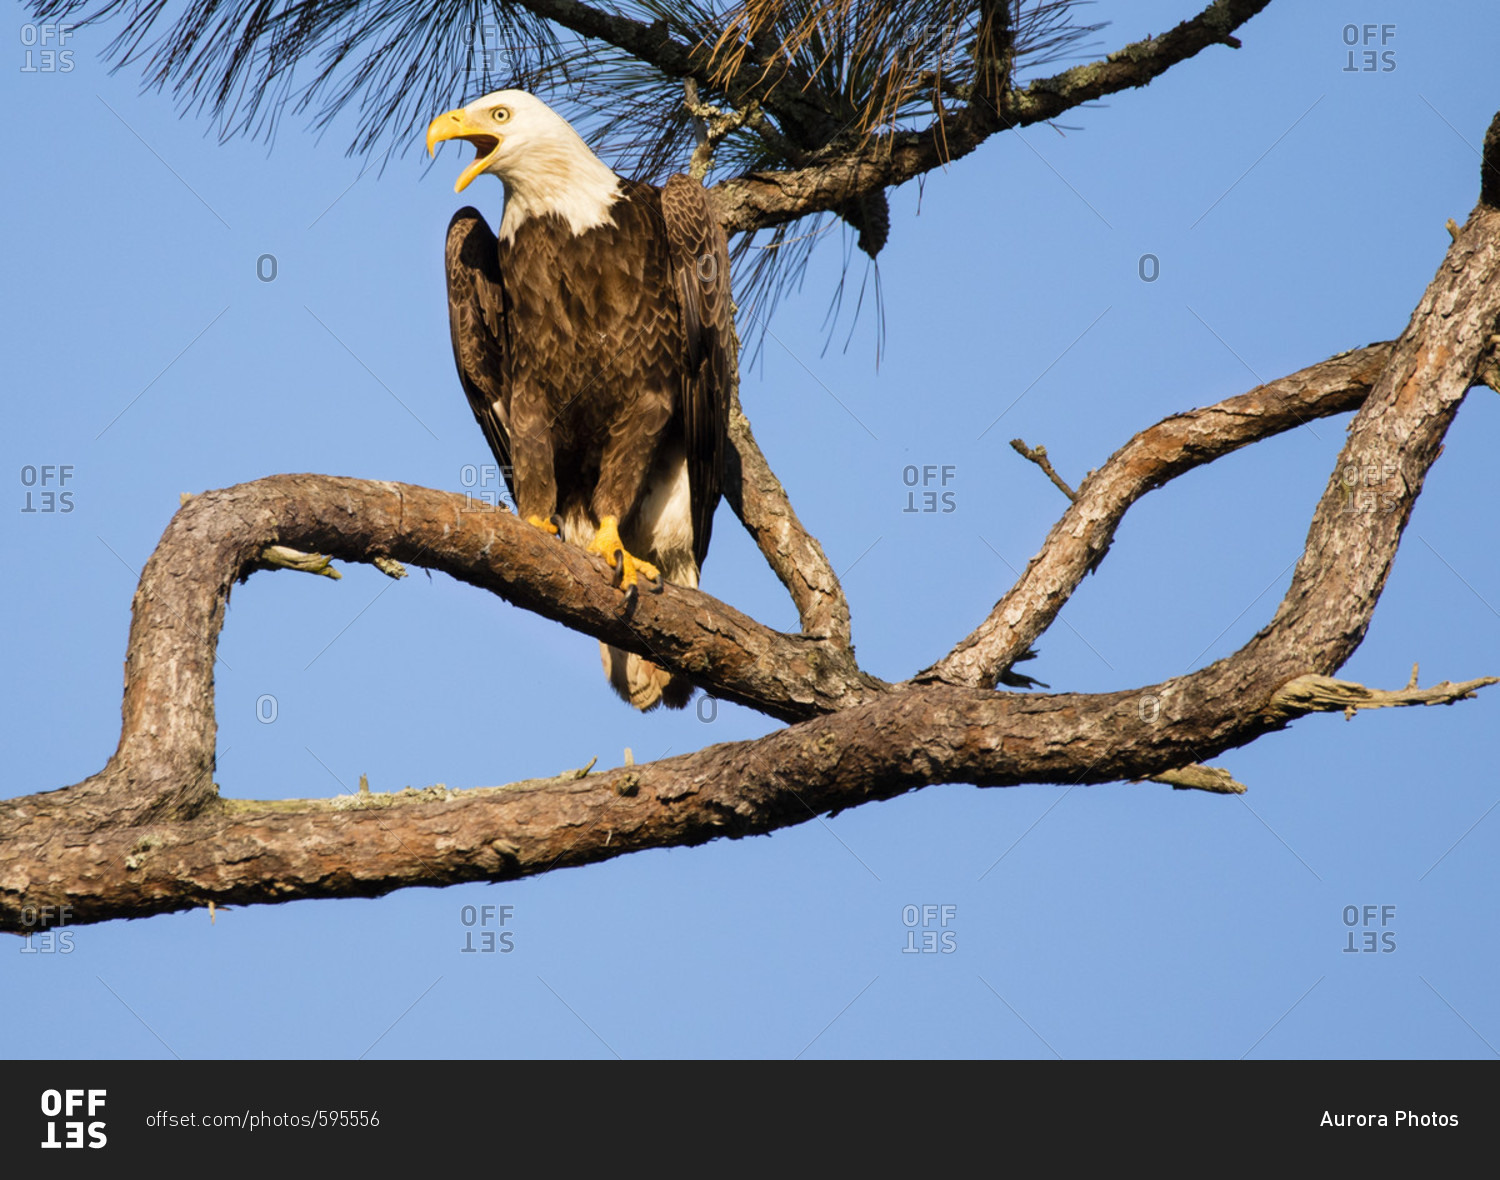 HOLIDAY, FL - MARCH 20, 2017: An adult bald eagle Haliaeetus leucocephalus post sentry near it's nest on the Gulf of Mexico shore in Holiday, FL